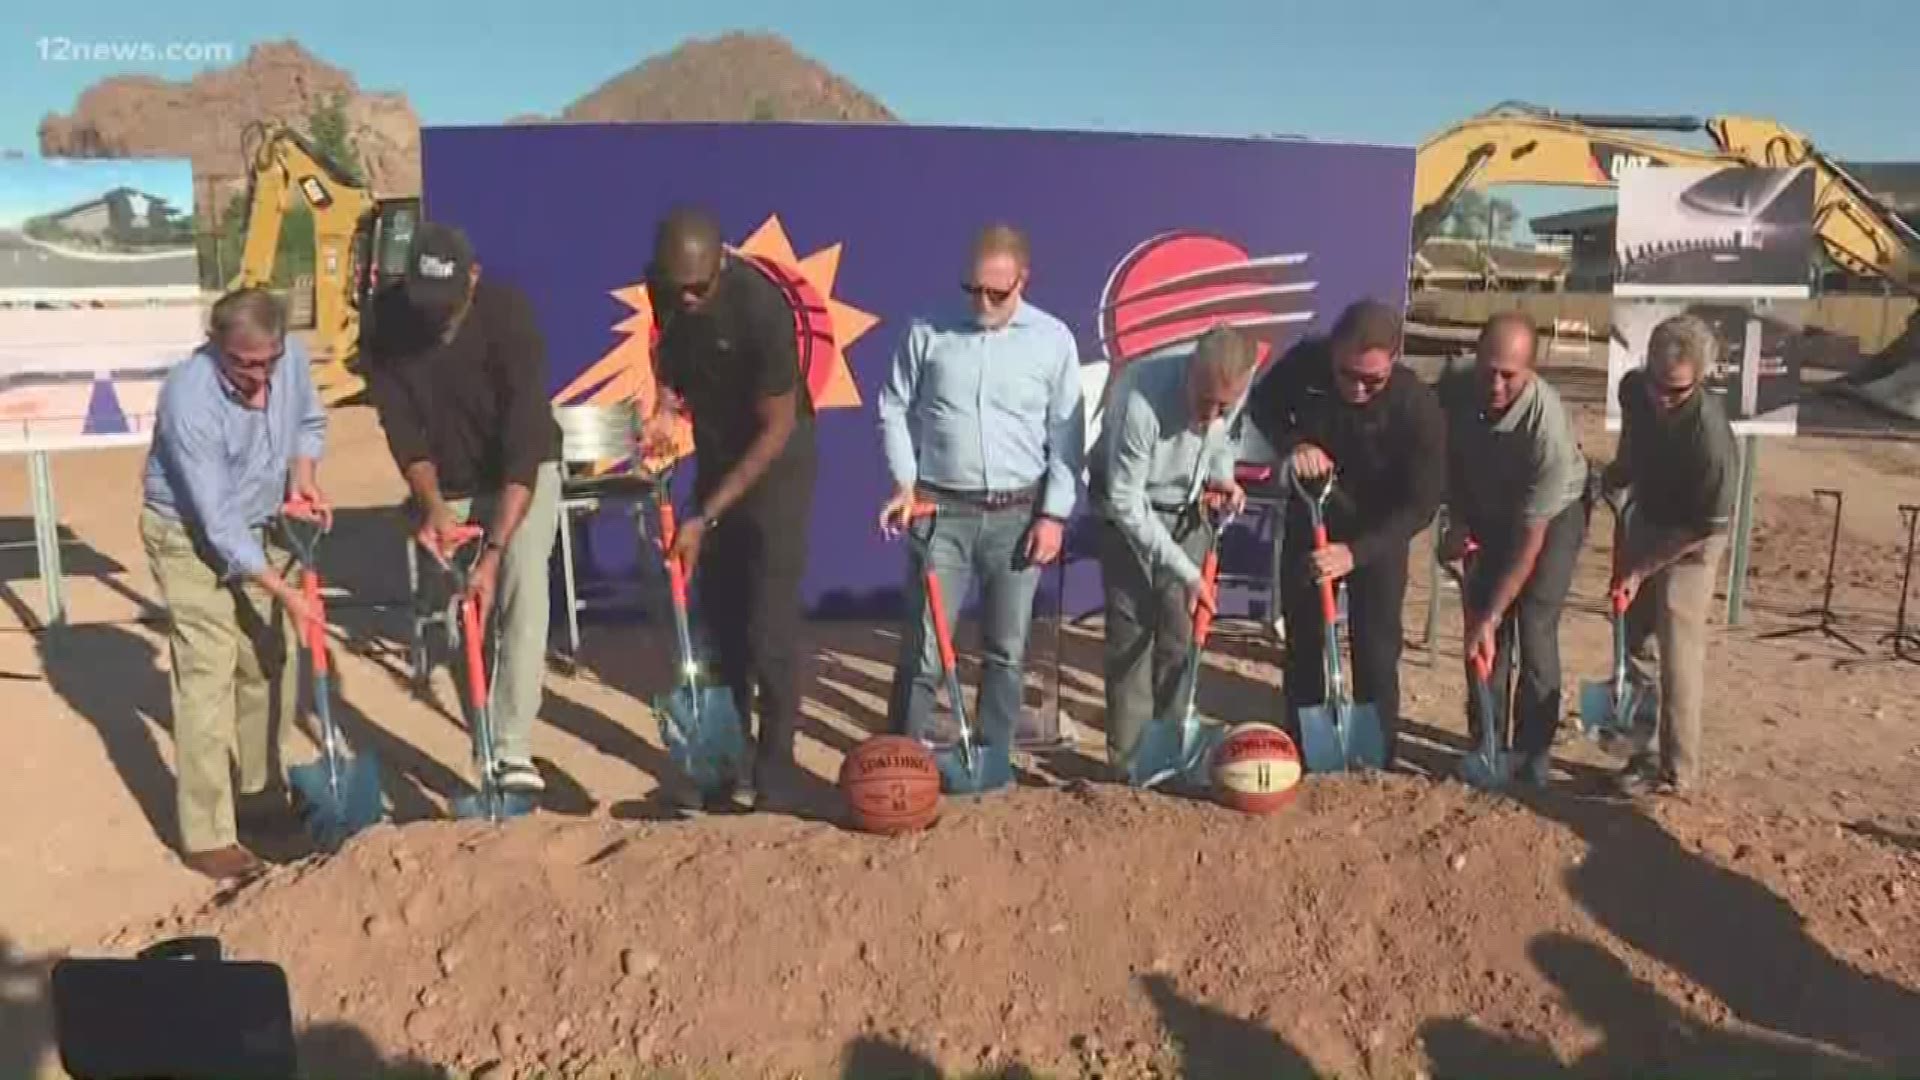 Phoenix Suns owner Robert Sarver and other members of the organization broke ground on a new practice facility in Arcadia Wednesday. It will be ready August 1, 2020.